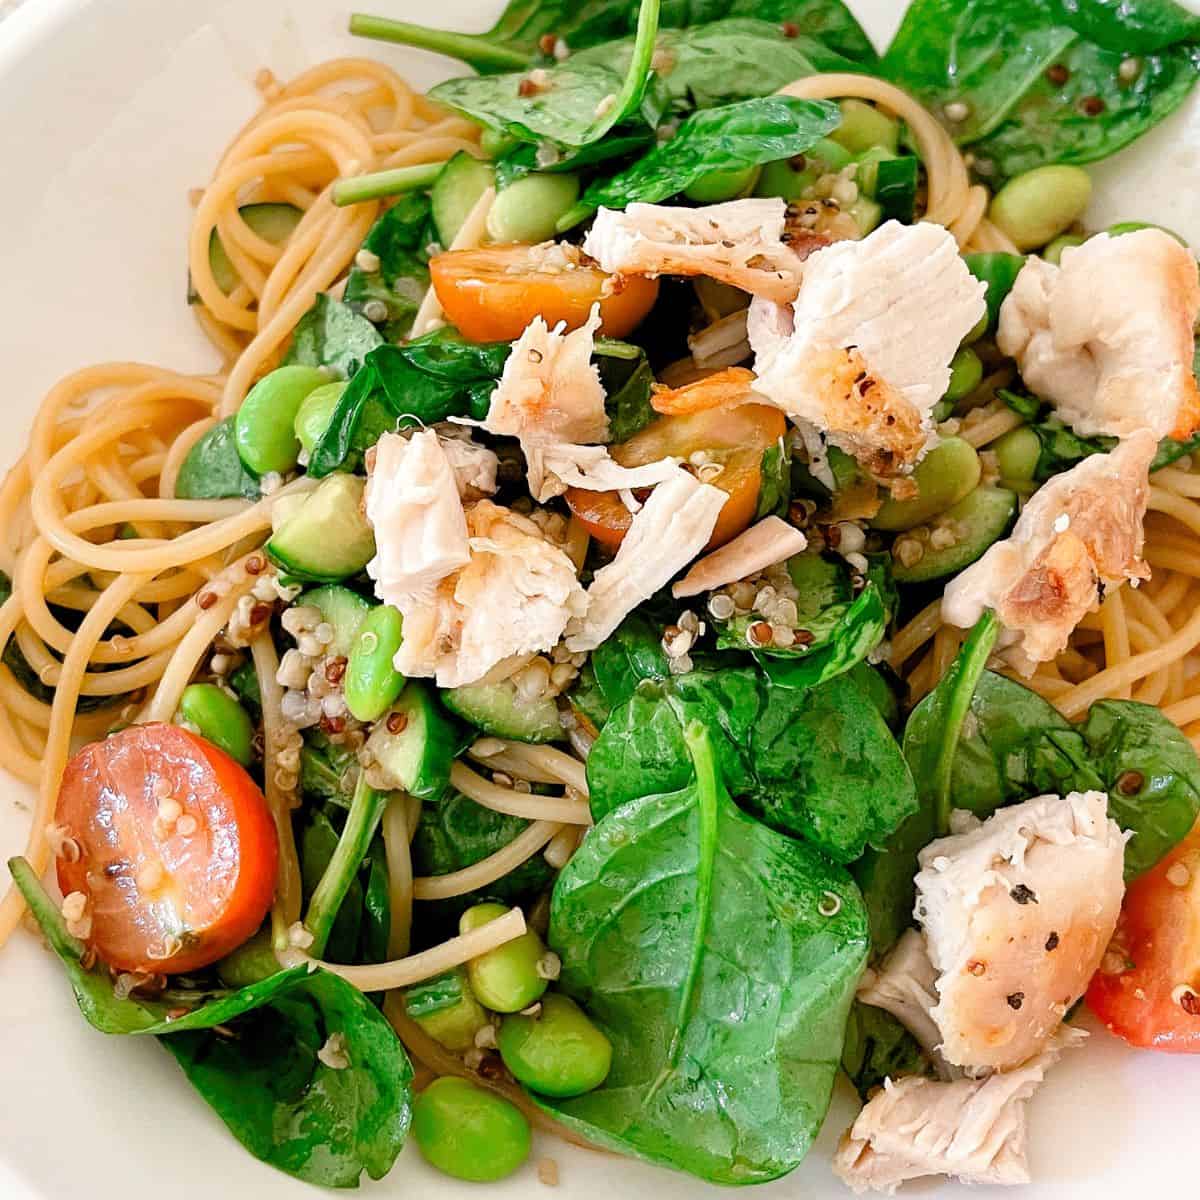 Easy and Cold Pasta Salad Recipes - Pasta Salad With Asian Soy Dressing